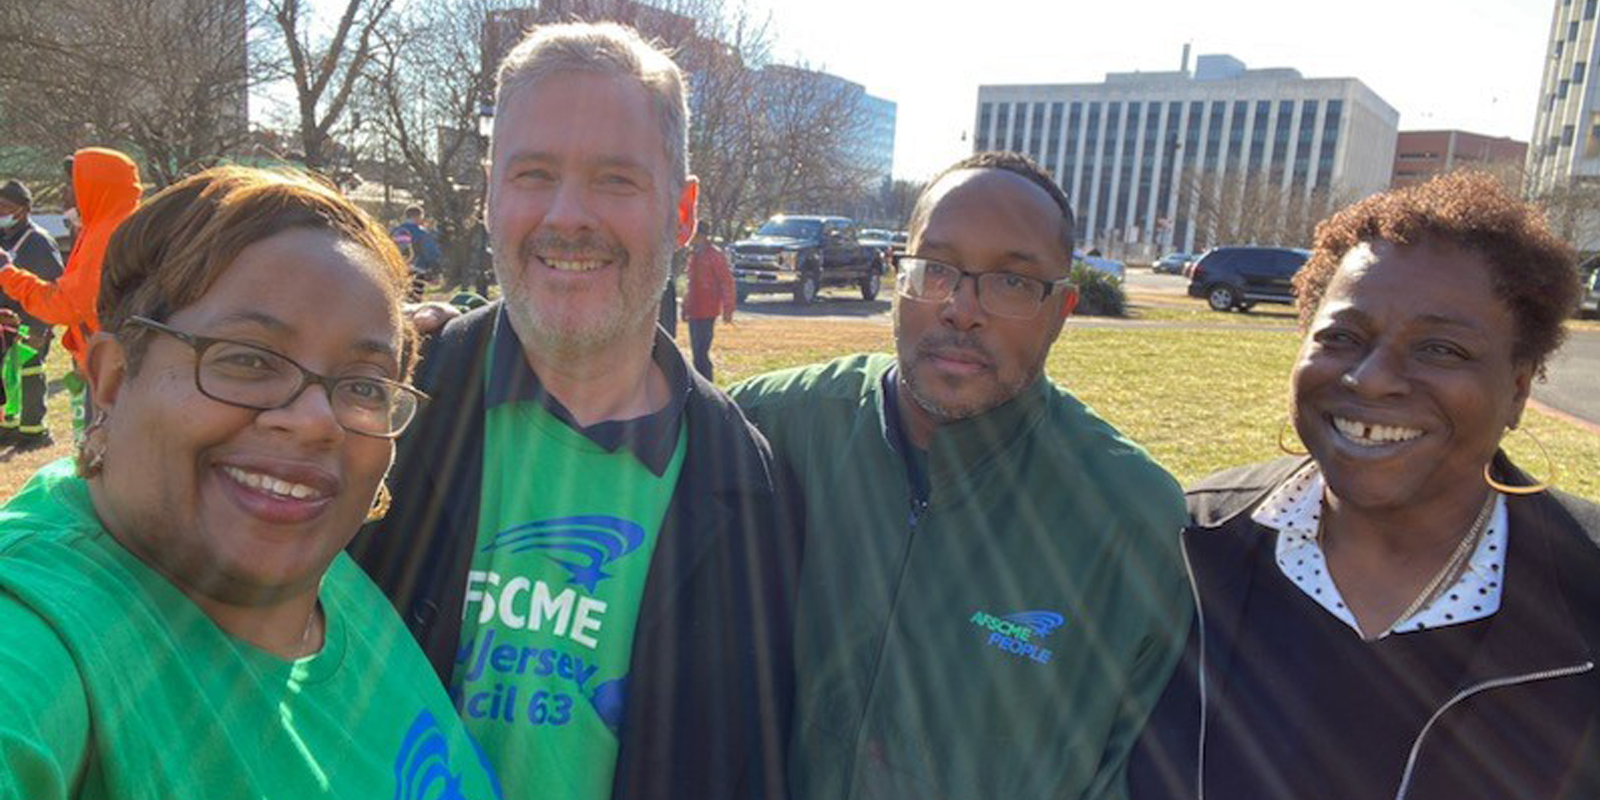 AFSCME New Jersey member answers the call to serve in elected office 